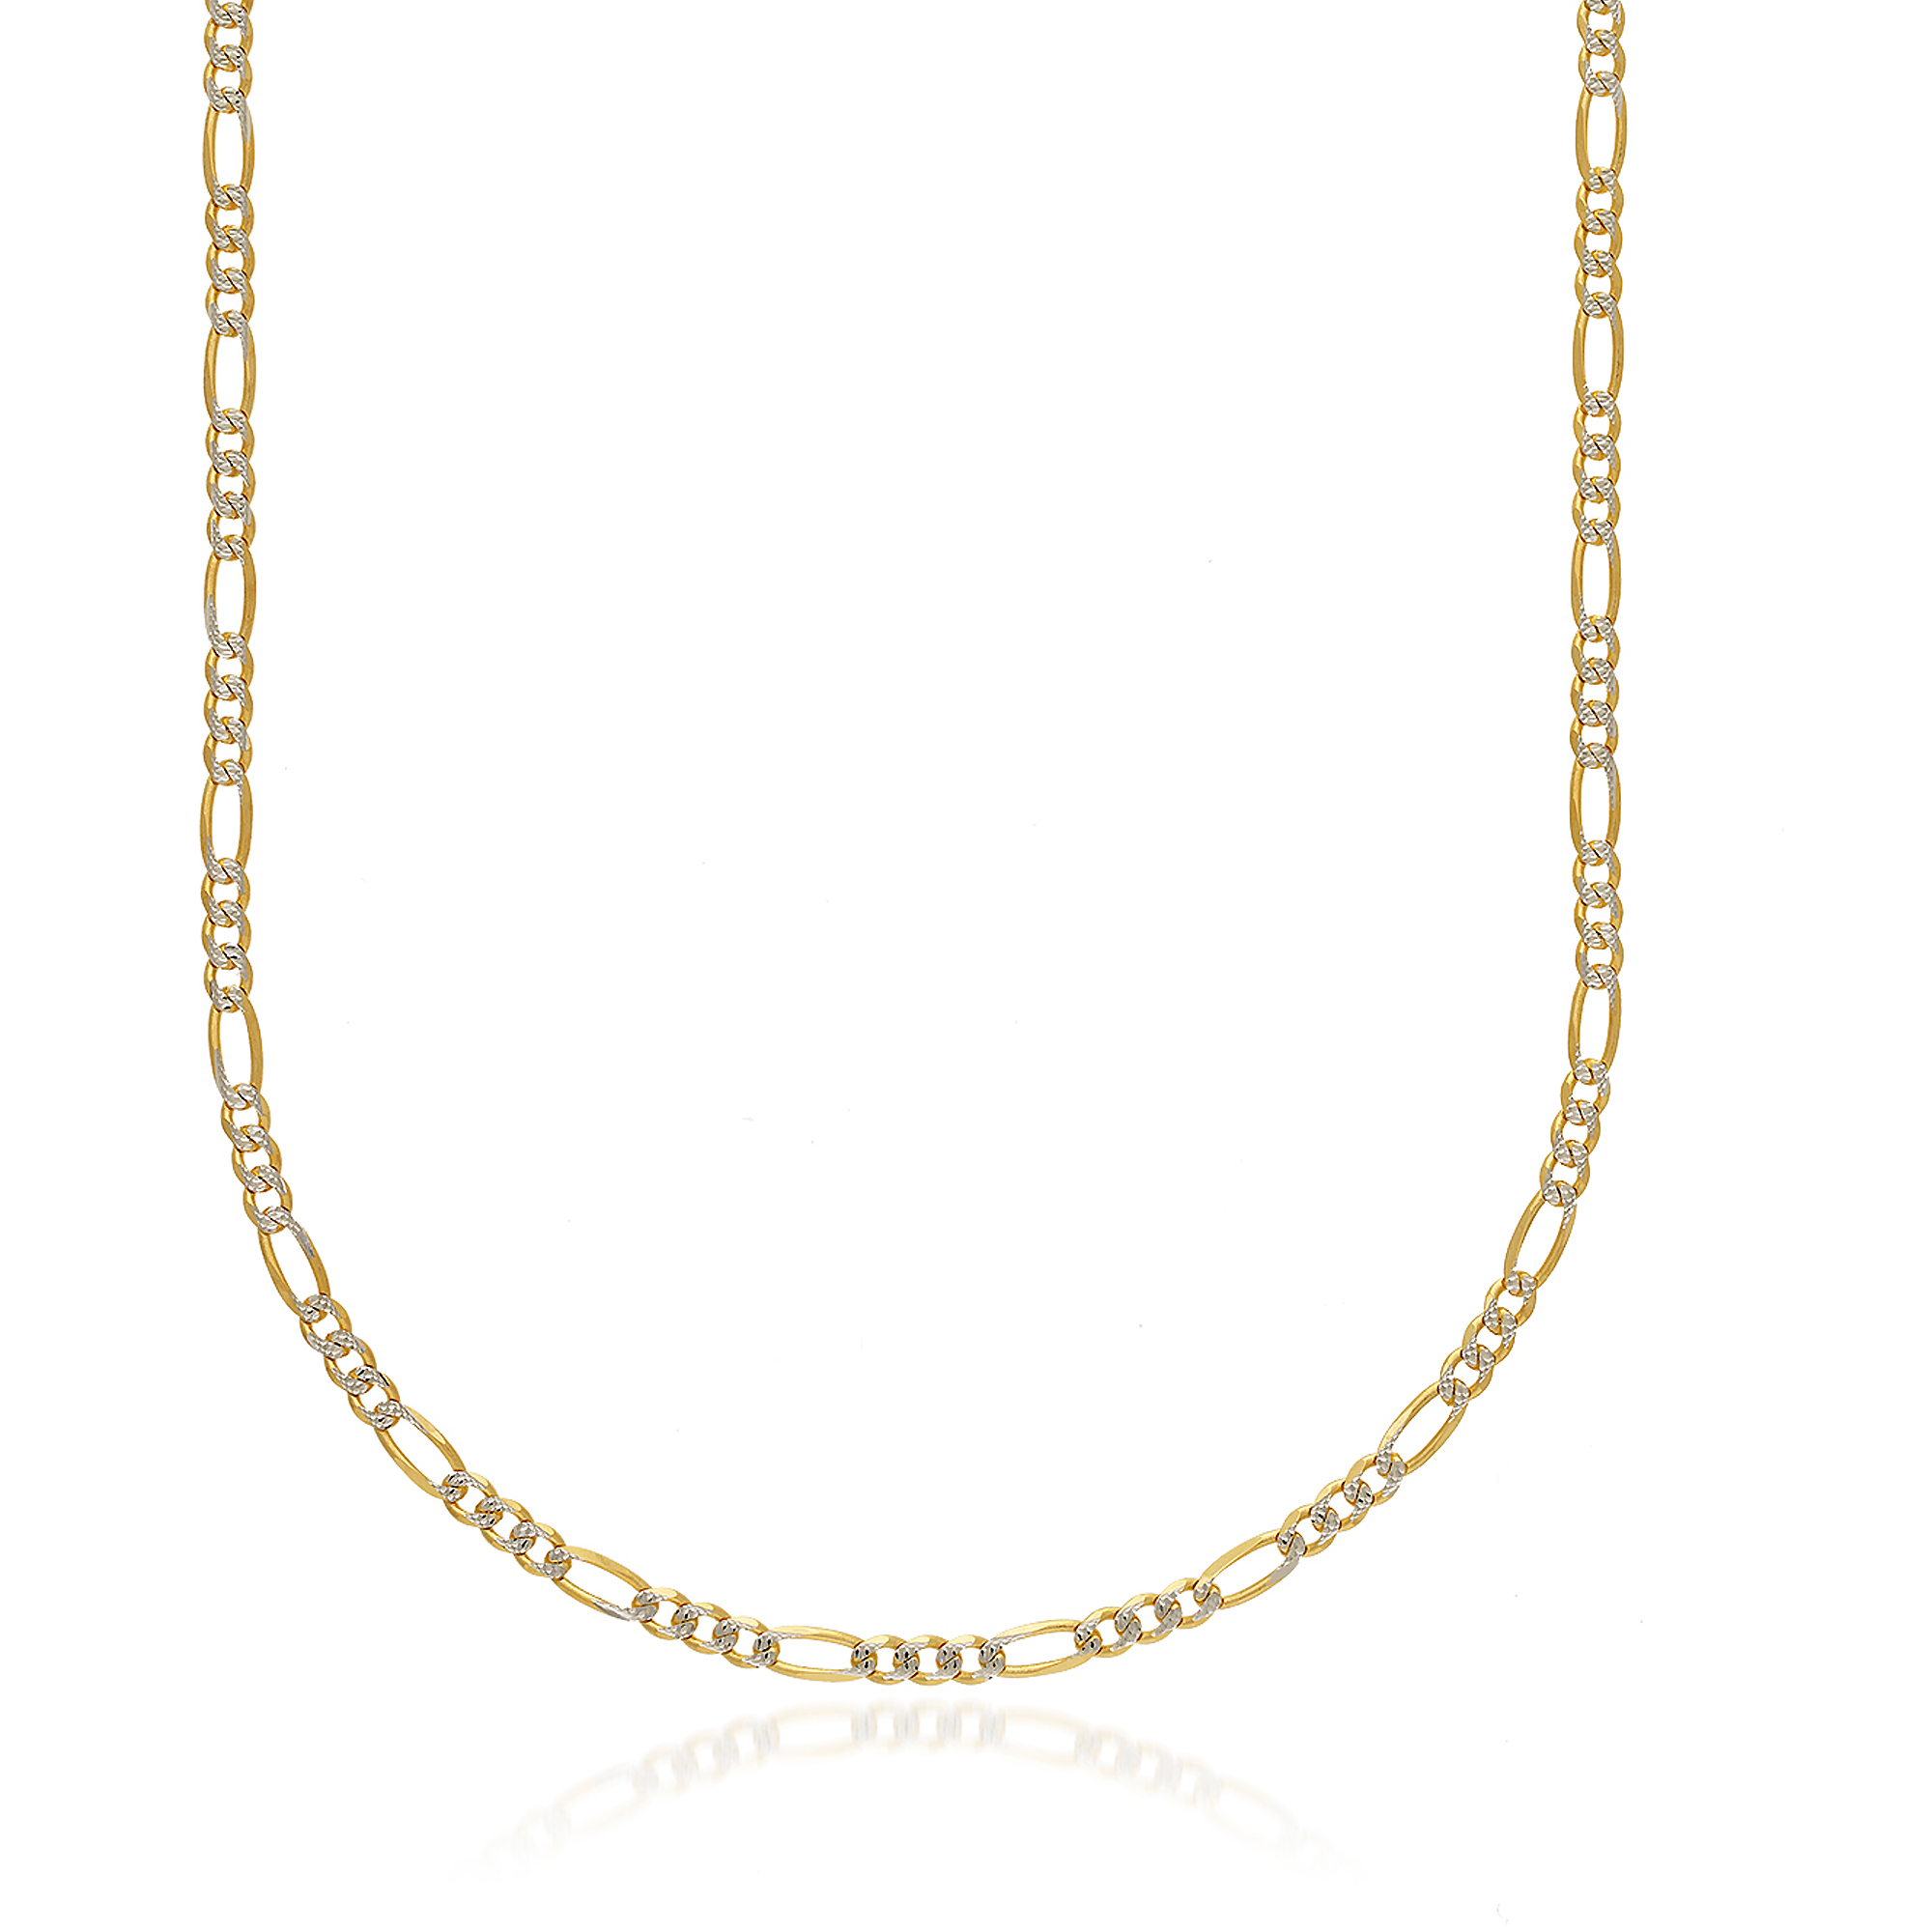 T&T 7mm Two-Tone Gold Stainless Steel Figaro 3+1 Chain Necklace C134 